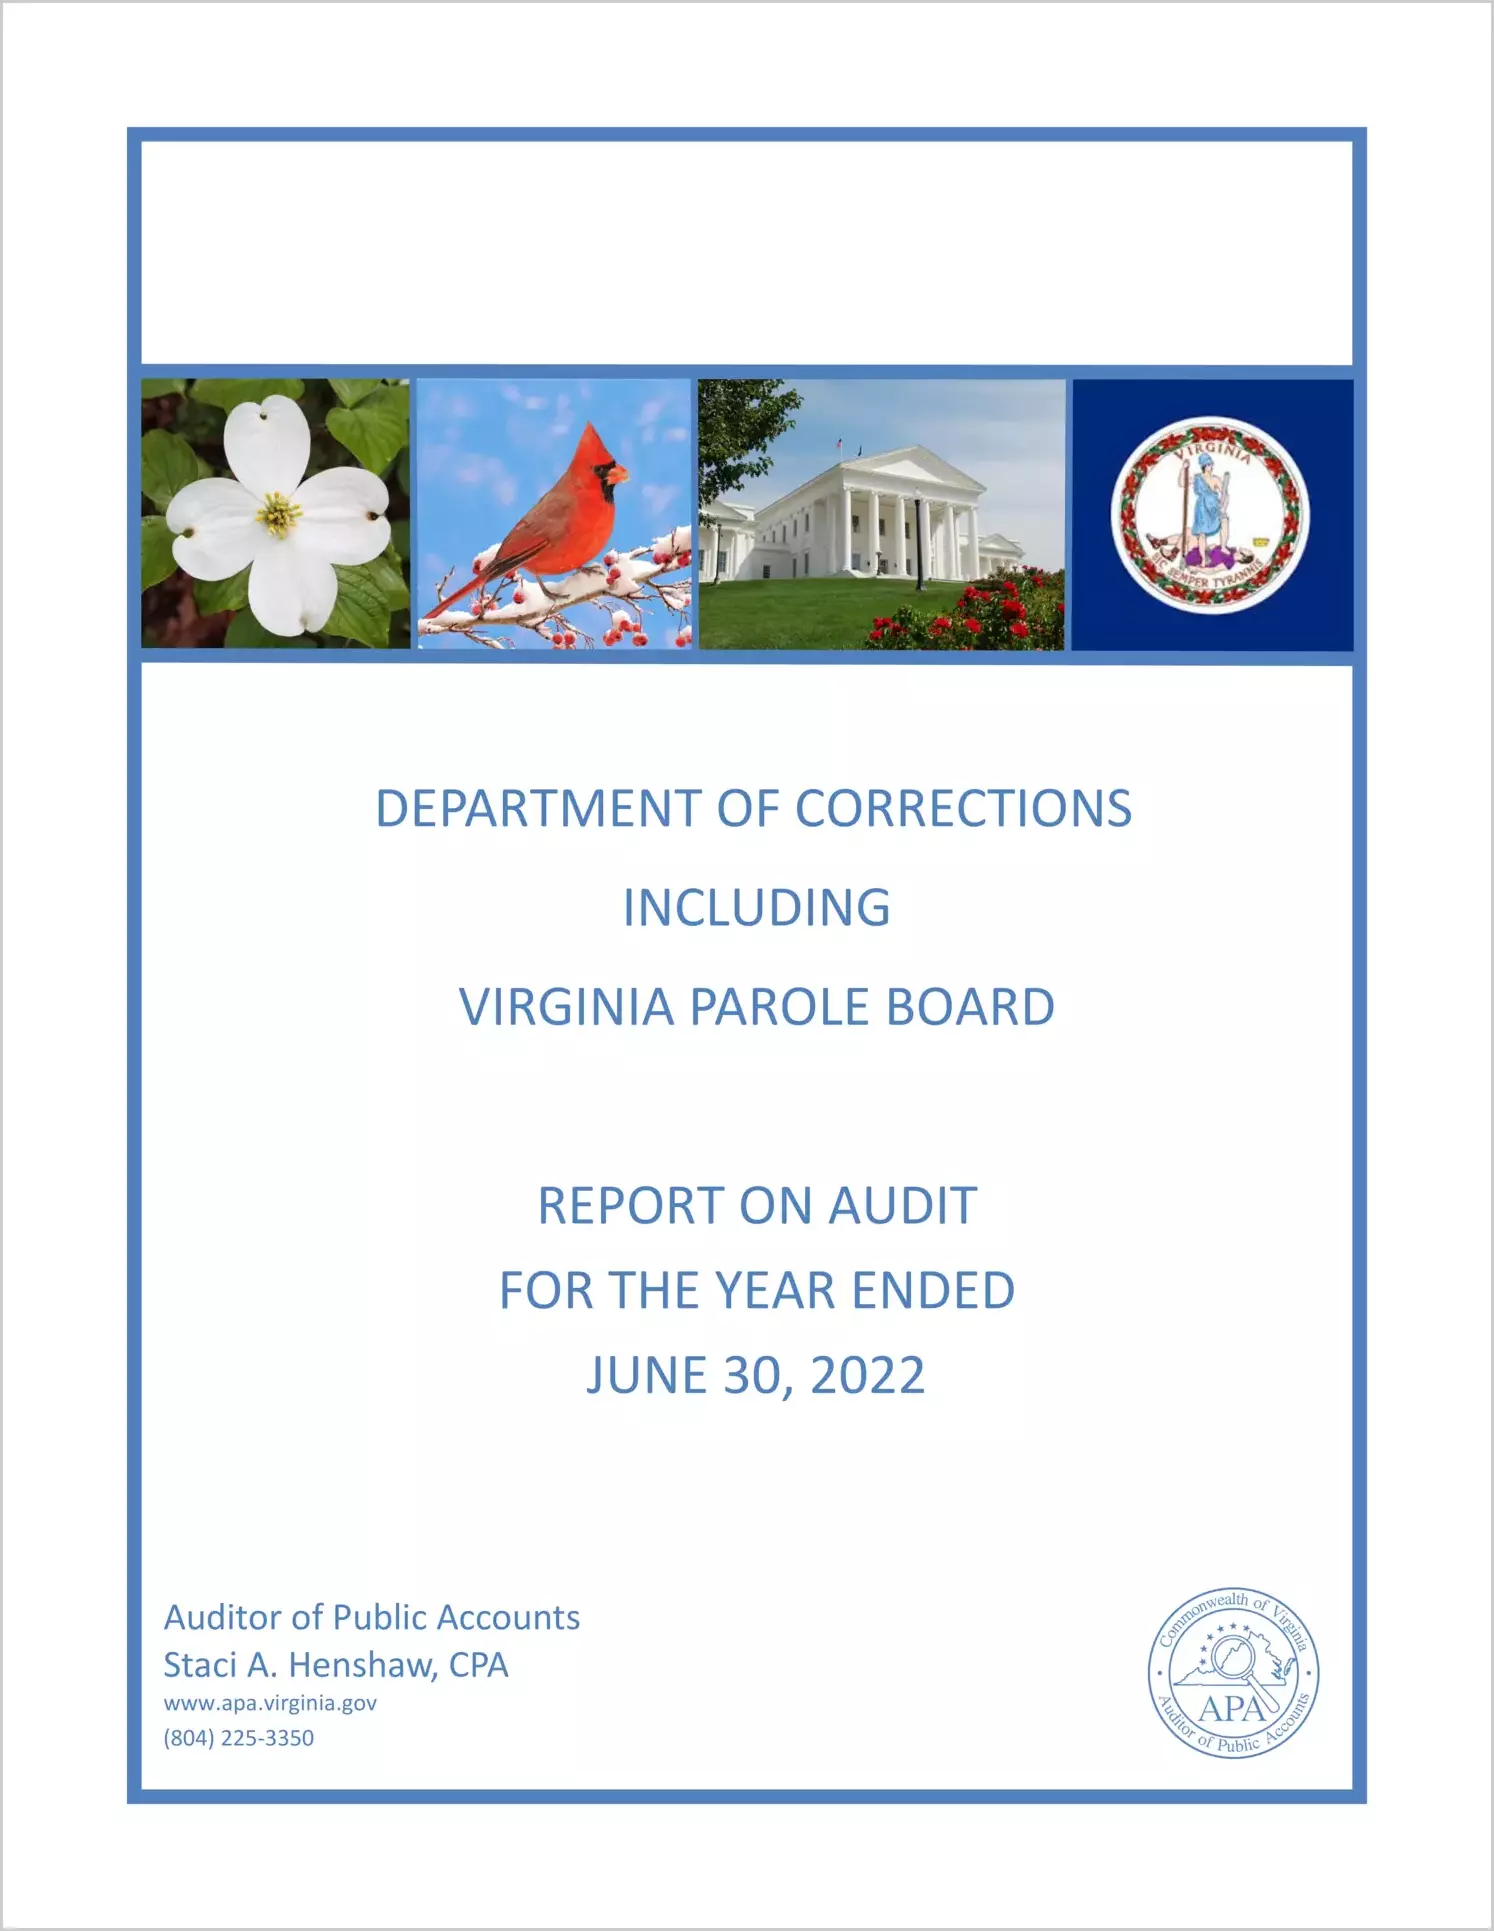 Department of Corrections Including Virginia Parole Board for the year ended June 30, 2022